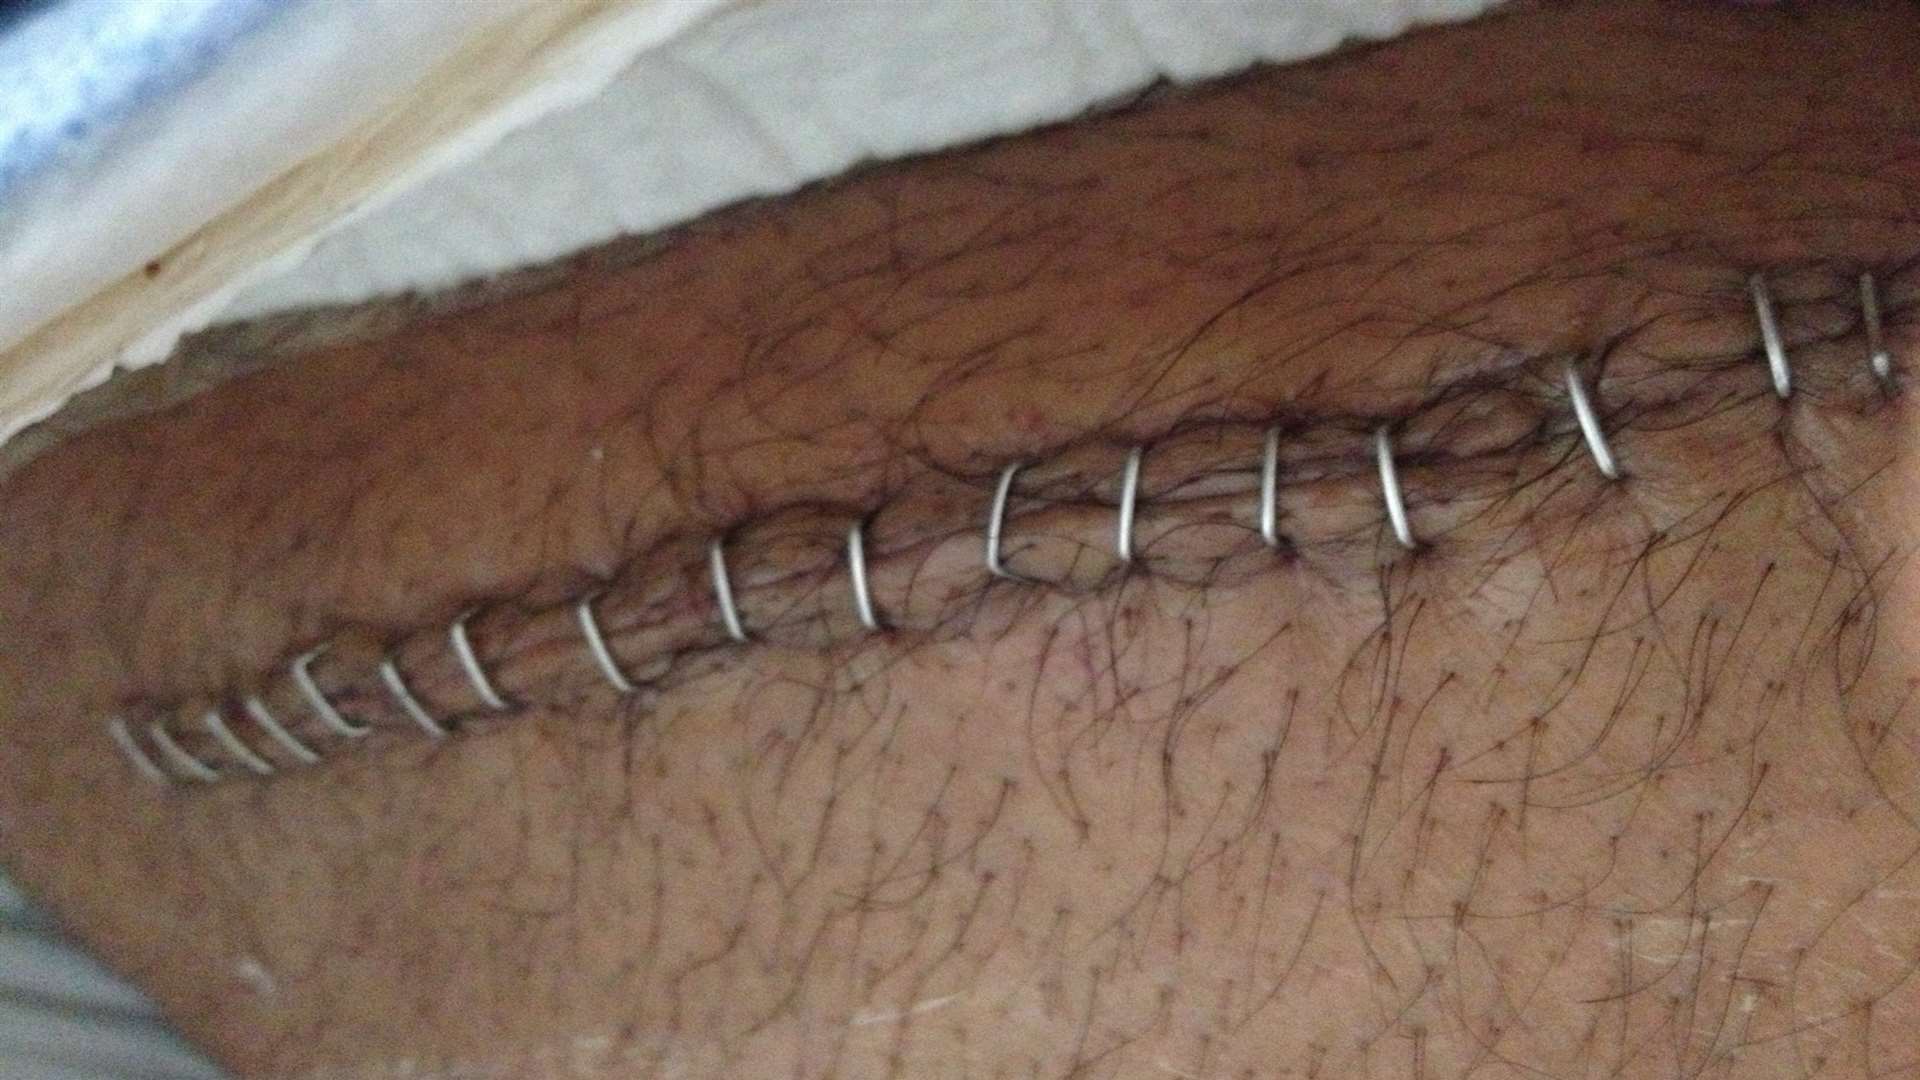 The wound to Gurdev Singh's leg, with 20 staples holding it together where doctors had to cut into the leg to stop deep bleeds